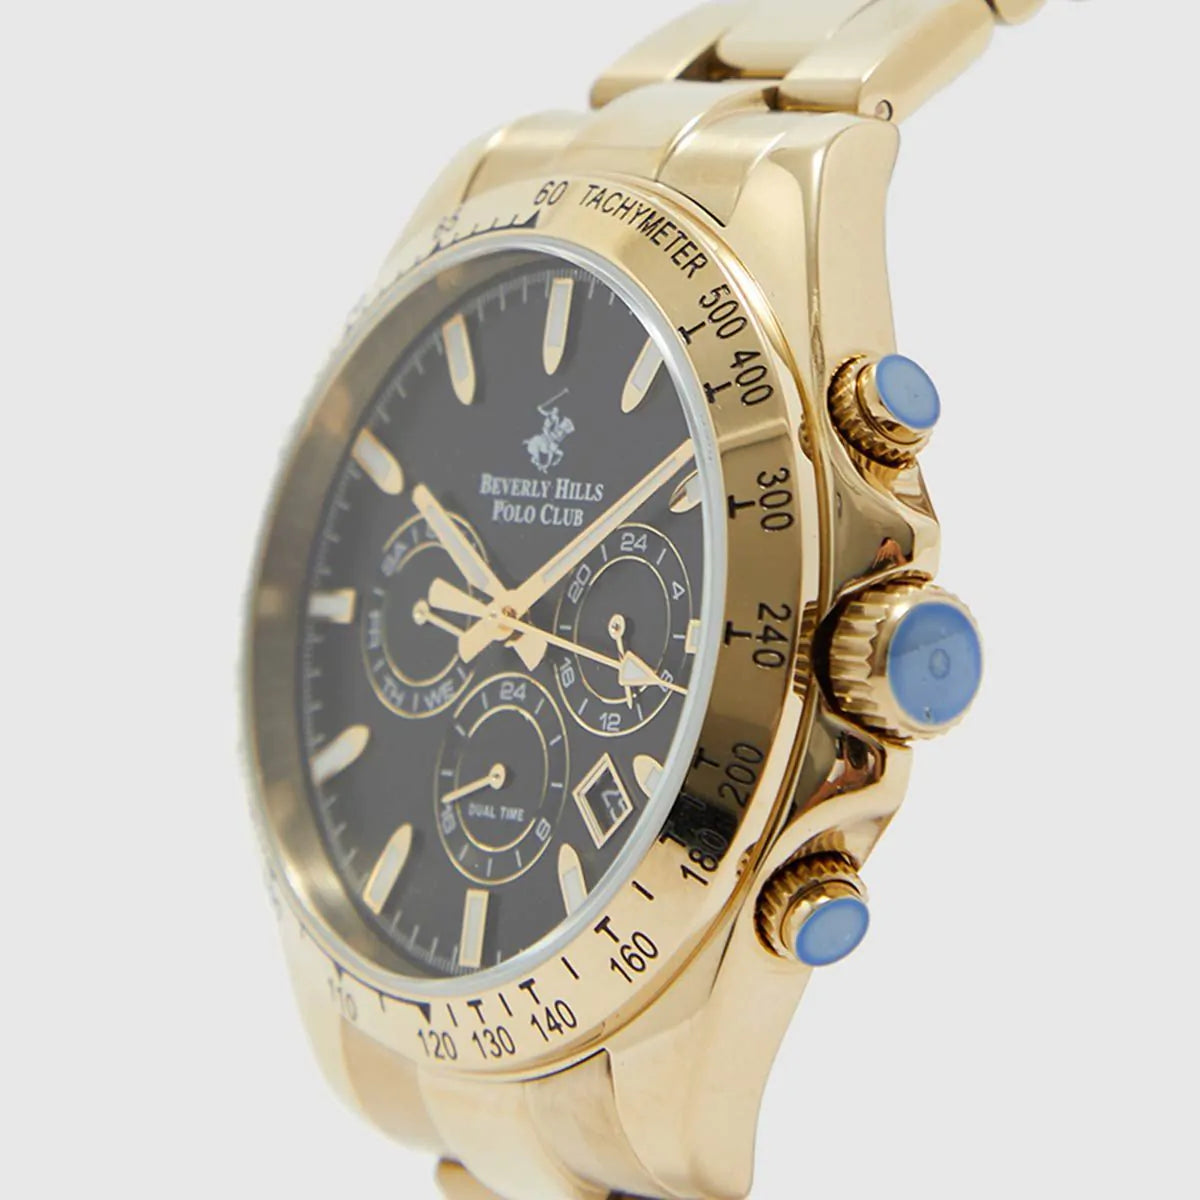 Beverly Hills Polo Club Chronograph Wrist Watch | Watches & Accessories | Halabh.com